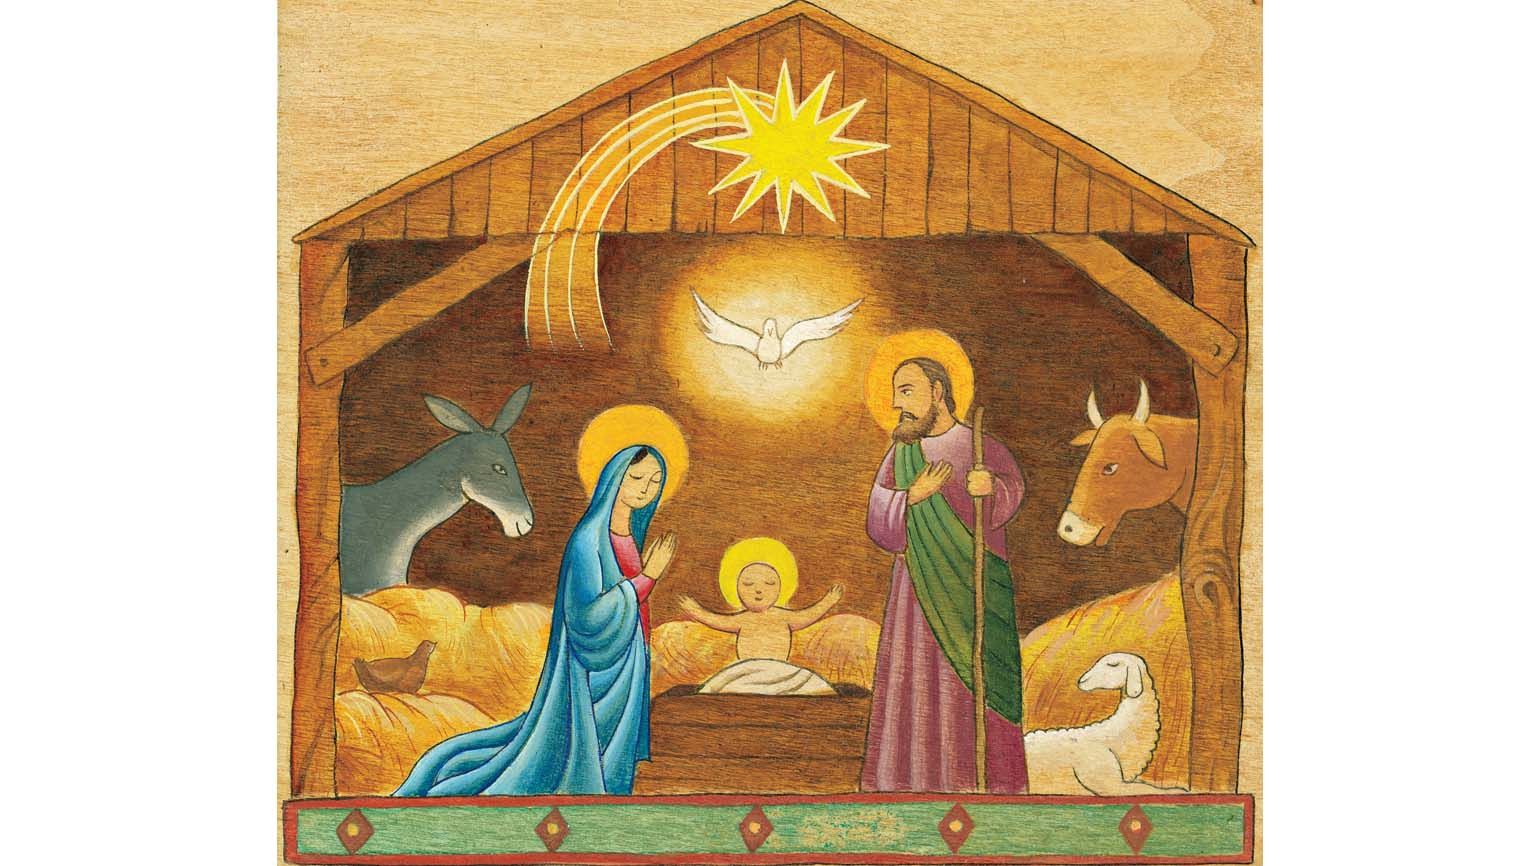 Mary, Joseph, and newborn Jesus with animals; Illustration by Stefano Vitale